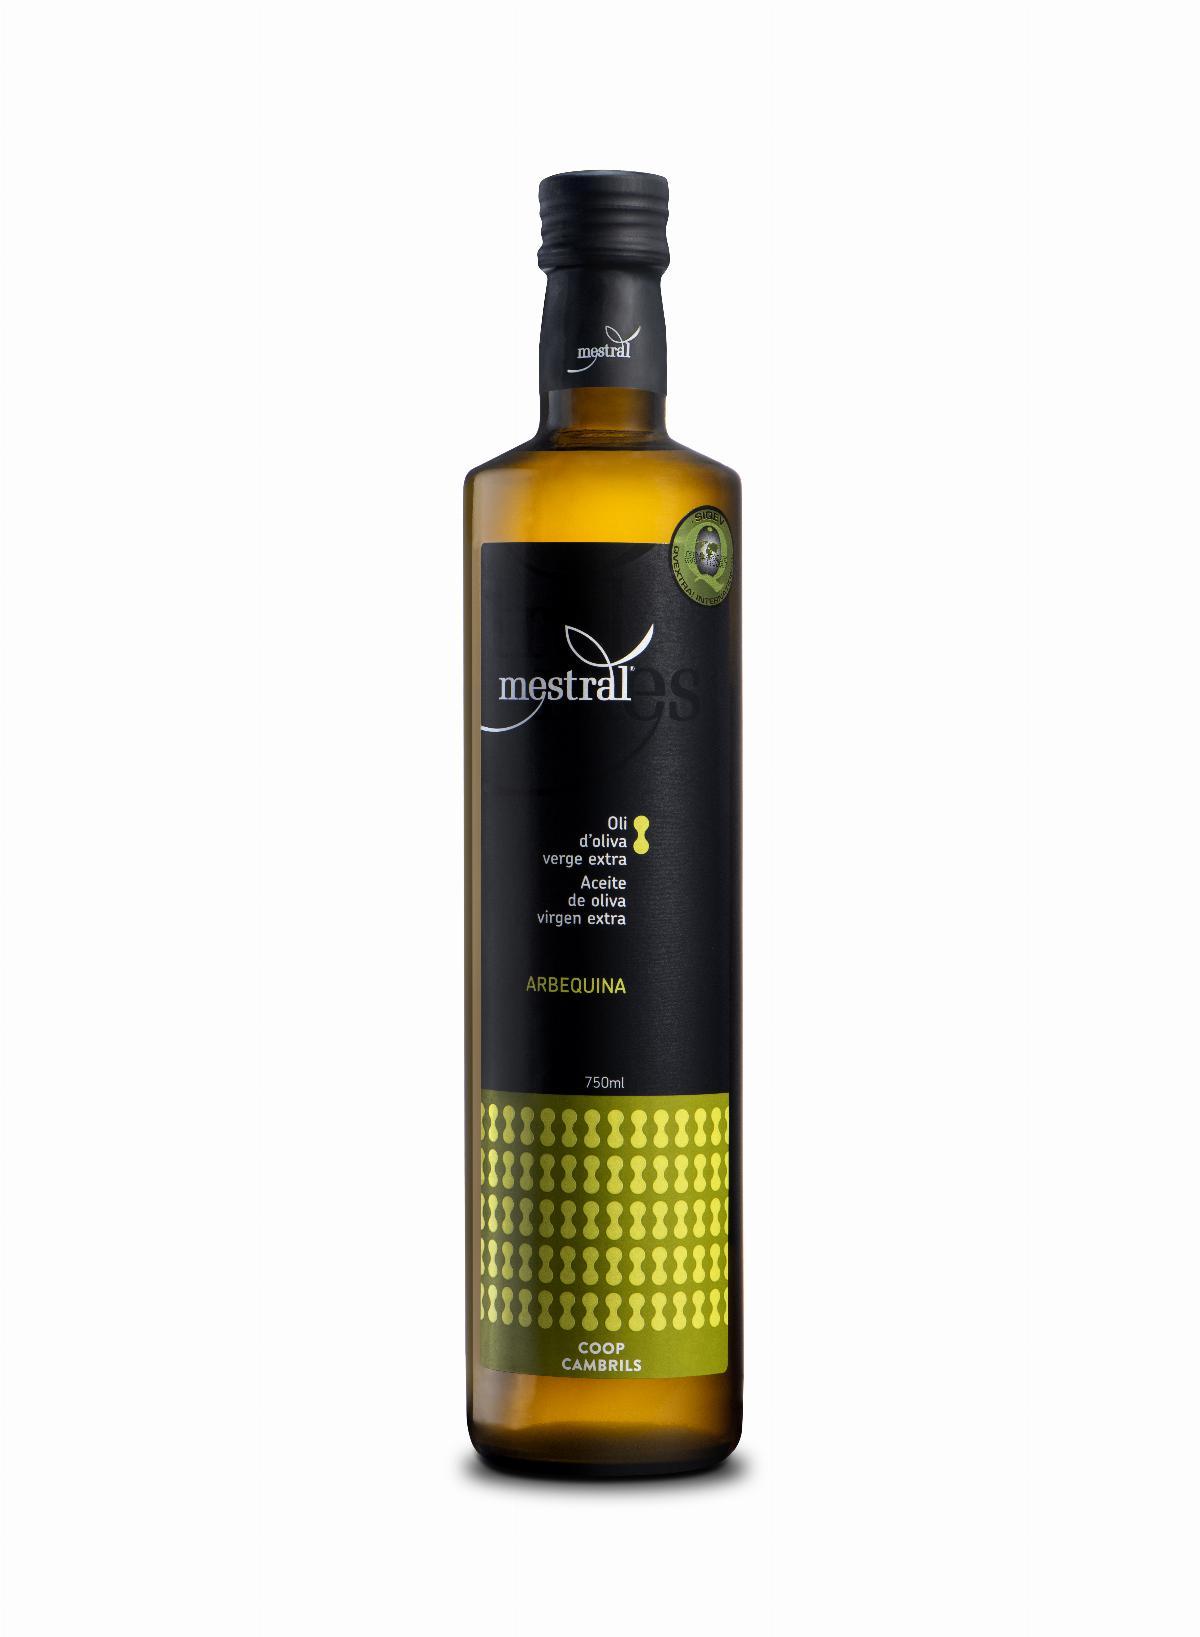 Huile d'olive et Condiments - Huile d'Olive Vierge Extra Mestral bouteille 750 mL 100% Arbequina - Mestral Cambrils